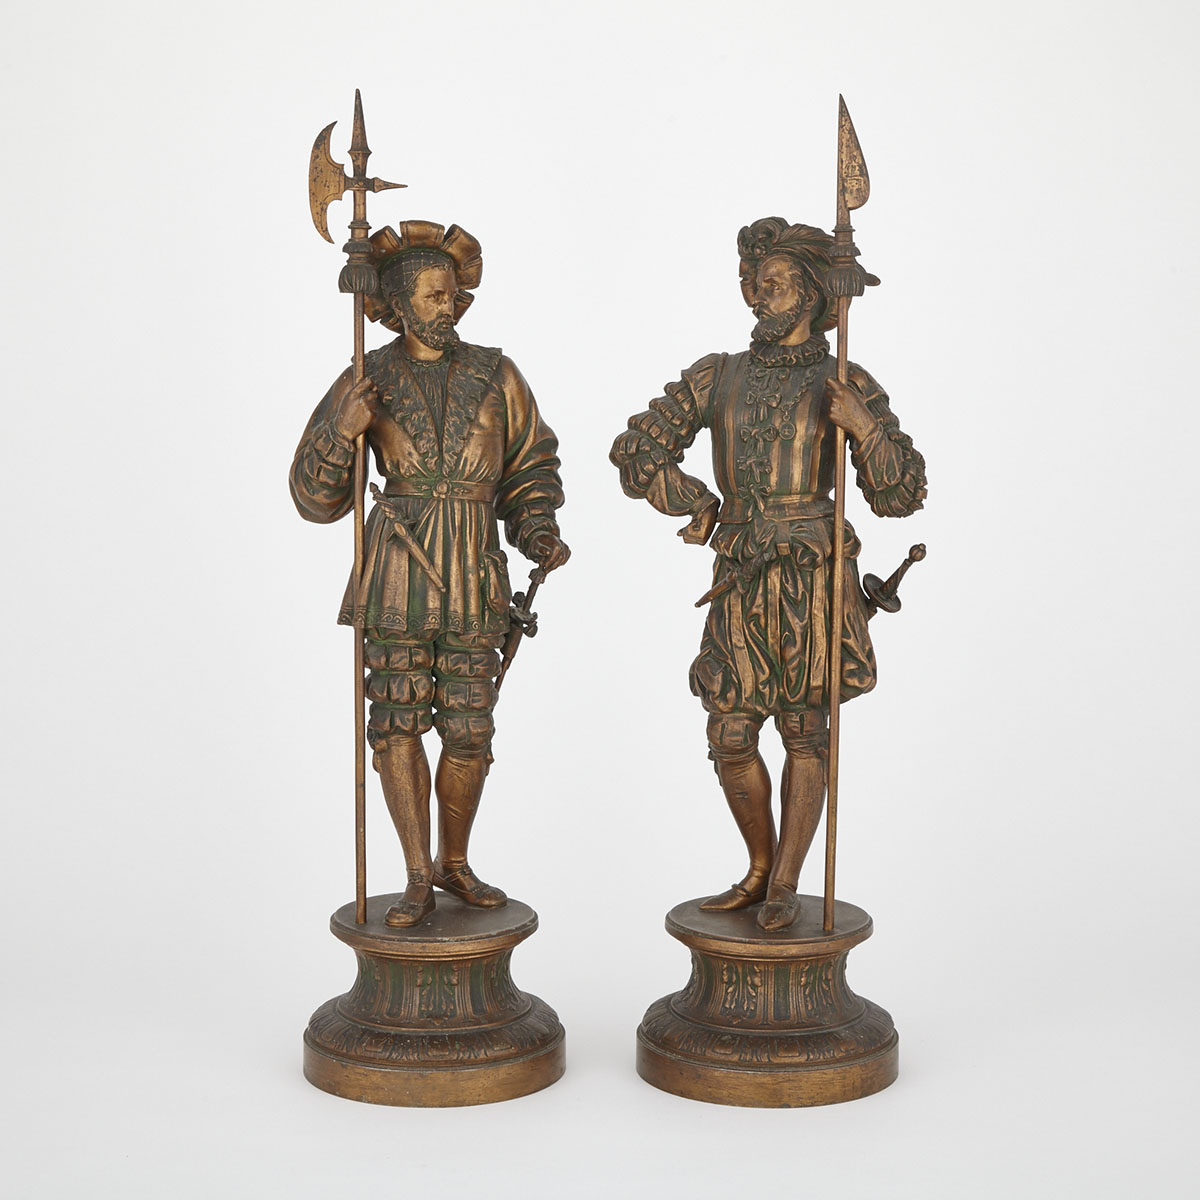 Pair of Patinated White Metal Figures of Renaissance Halberdiers, late 19th/early 20th century